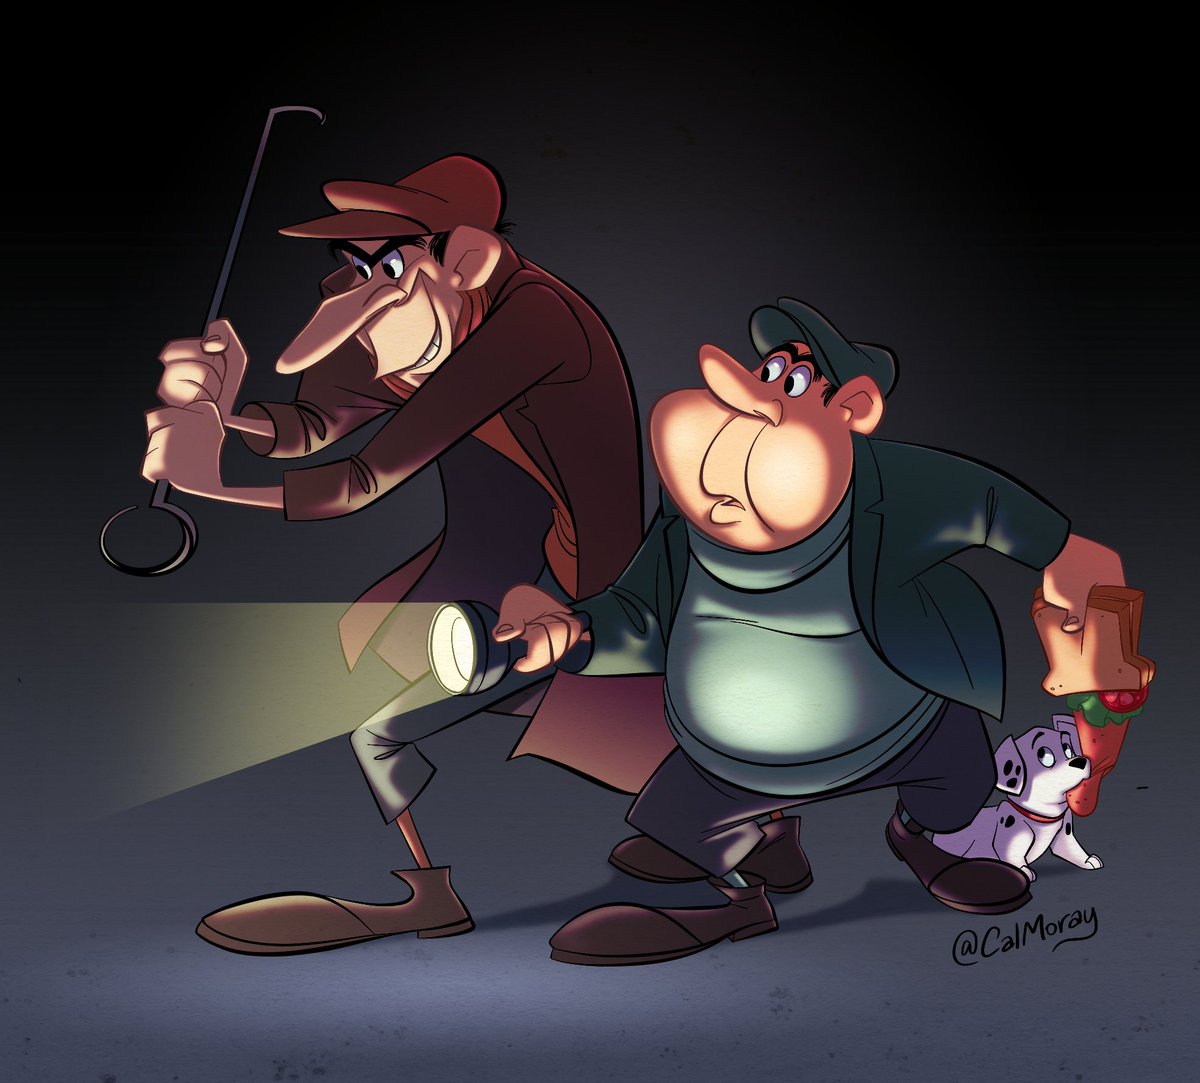 My finished entry for the #SidekicksCollab - Horace and Jasper.101 Dalmatia...